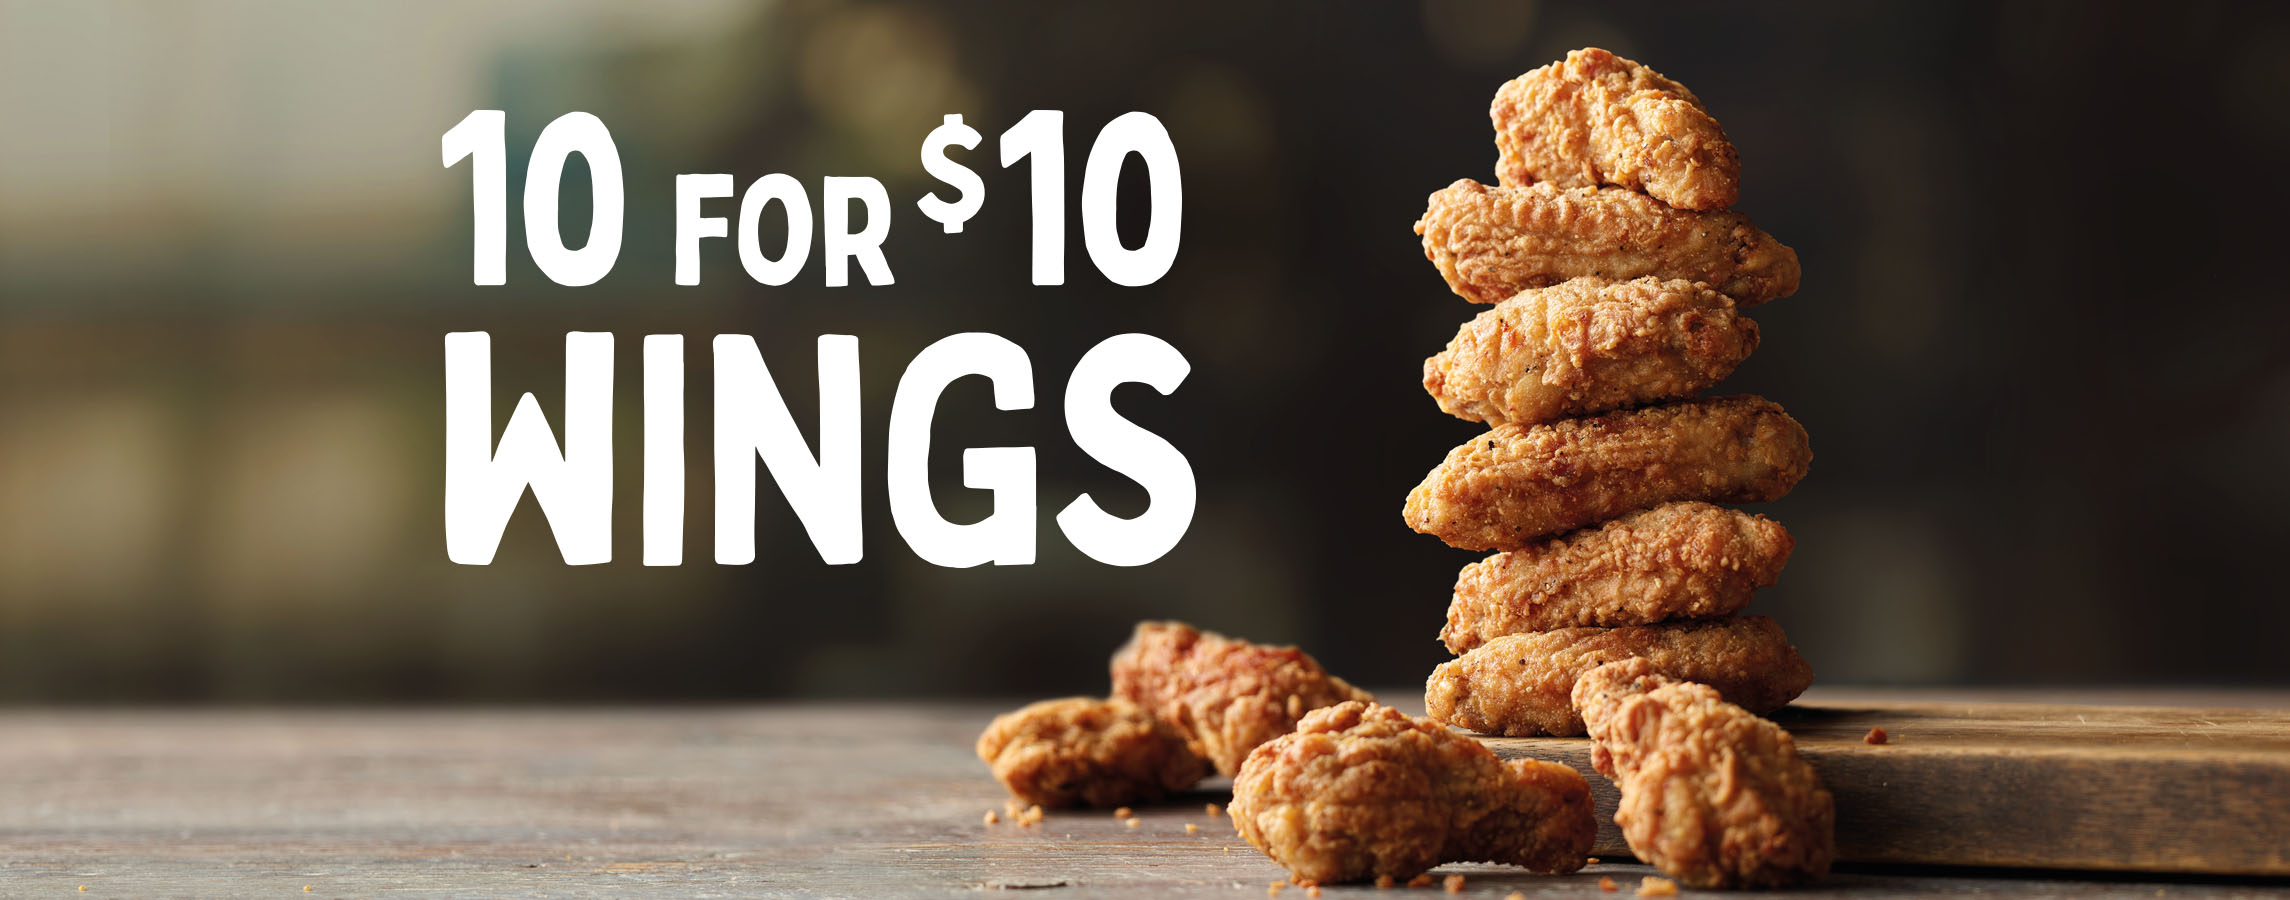 Red Rooster enjoy delicious 10 for $10 wings